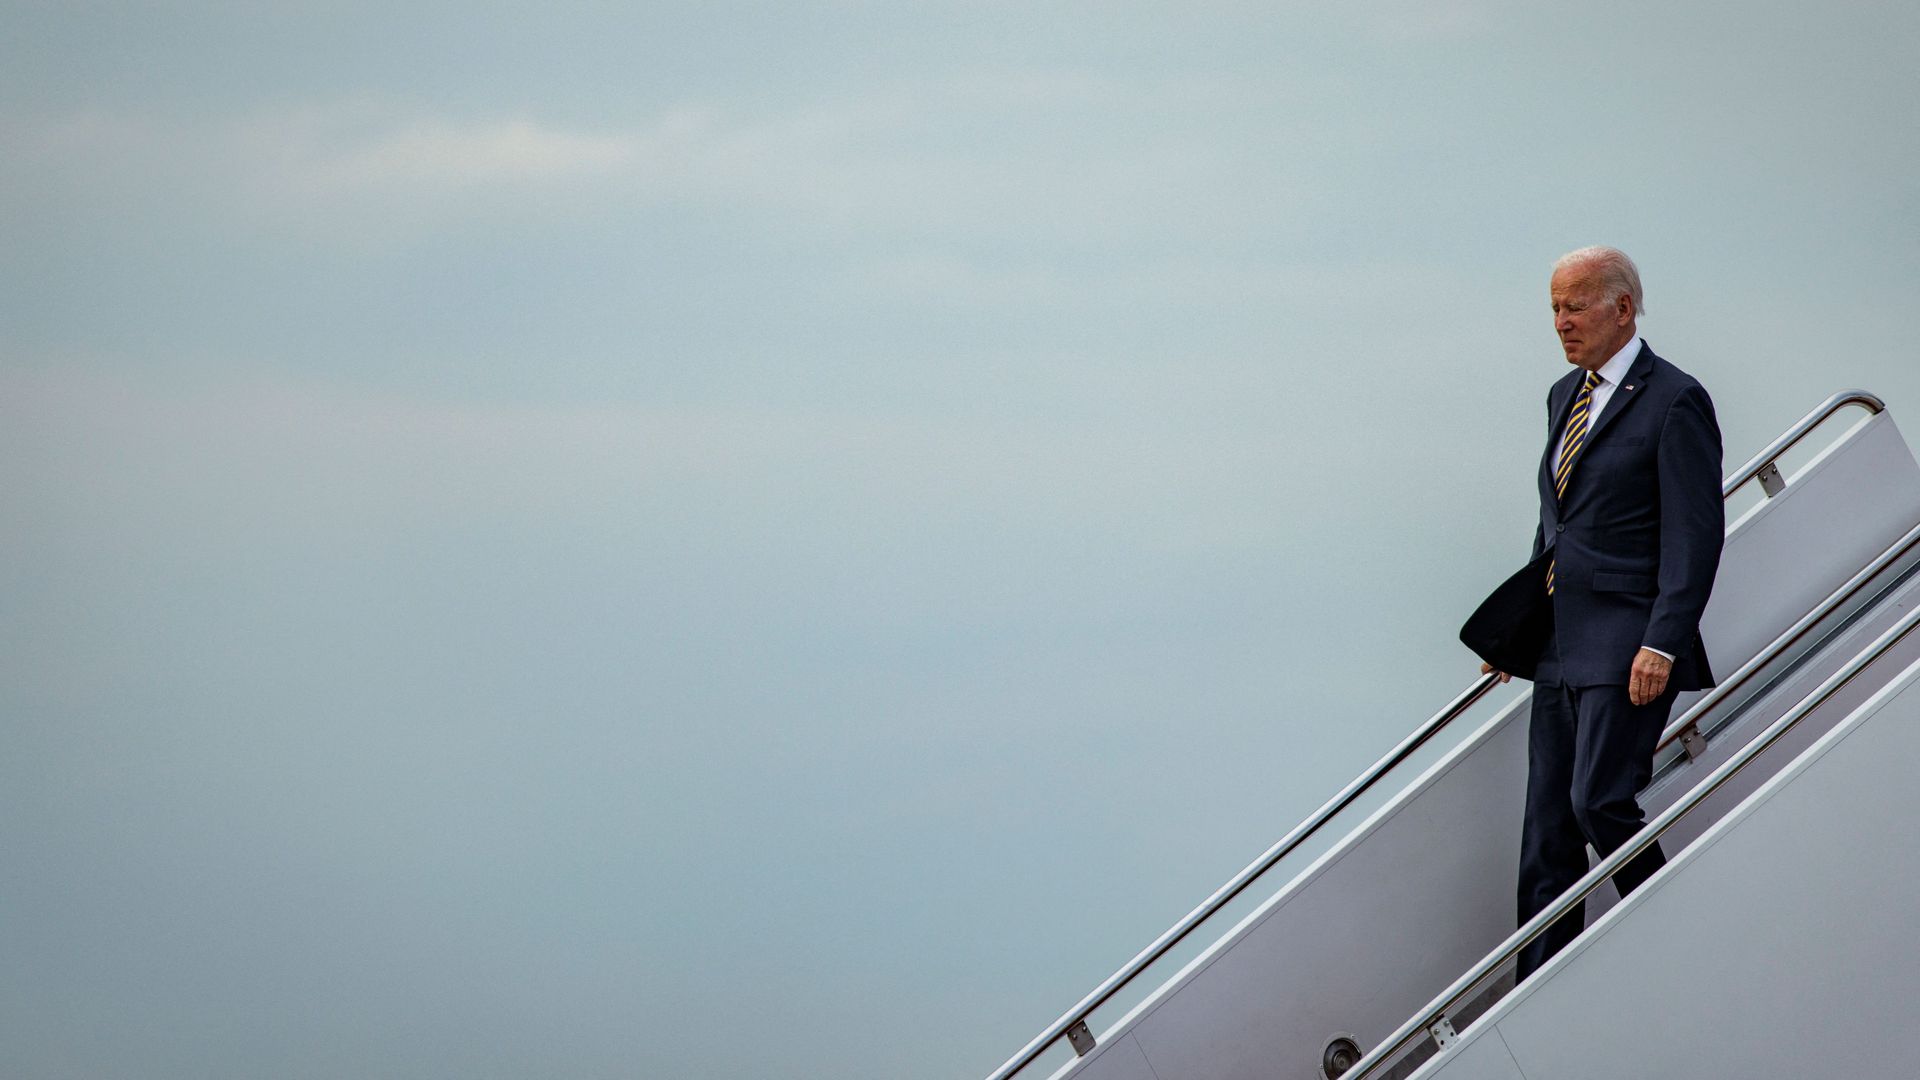 Biden walks down steps from Air Force One